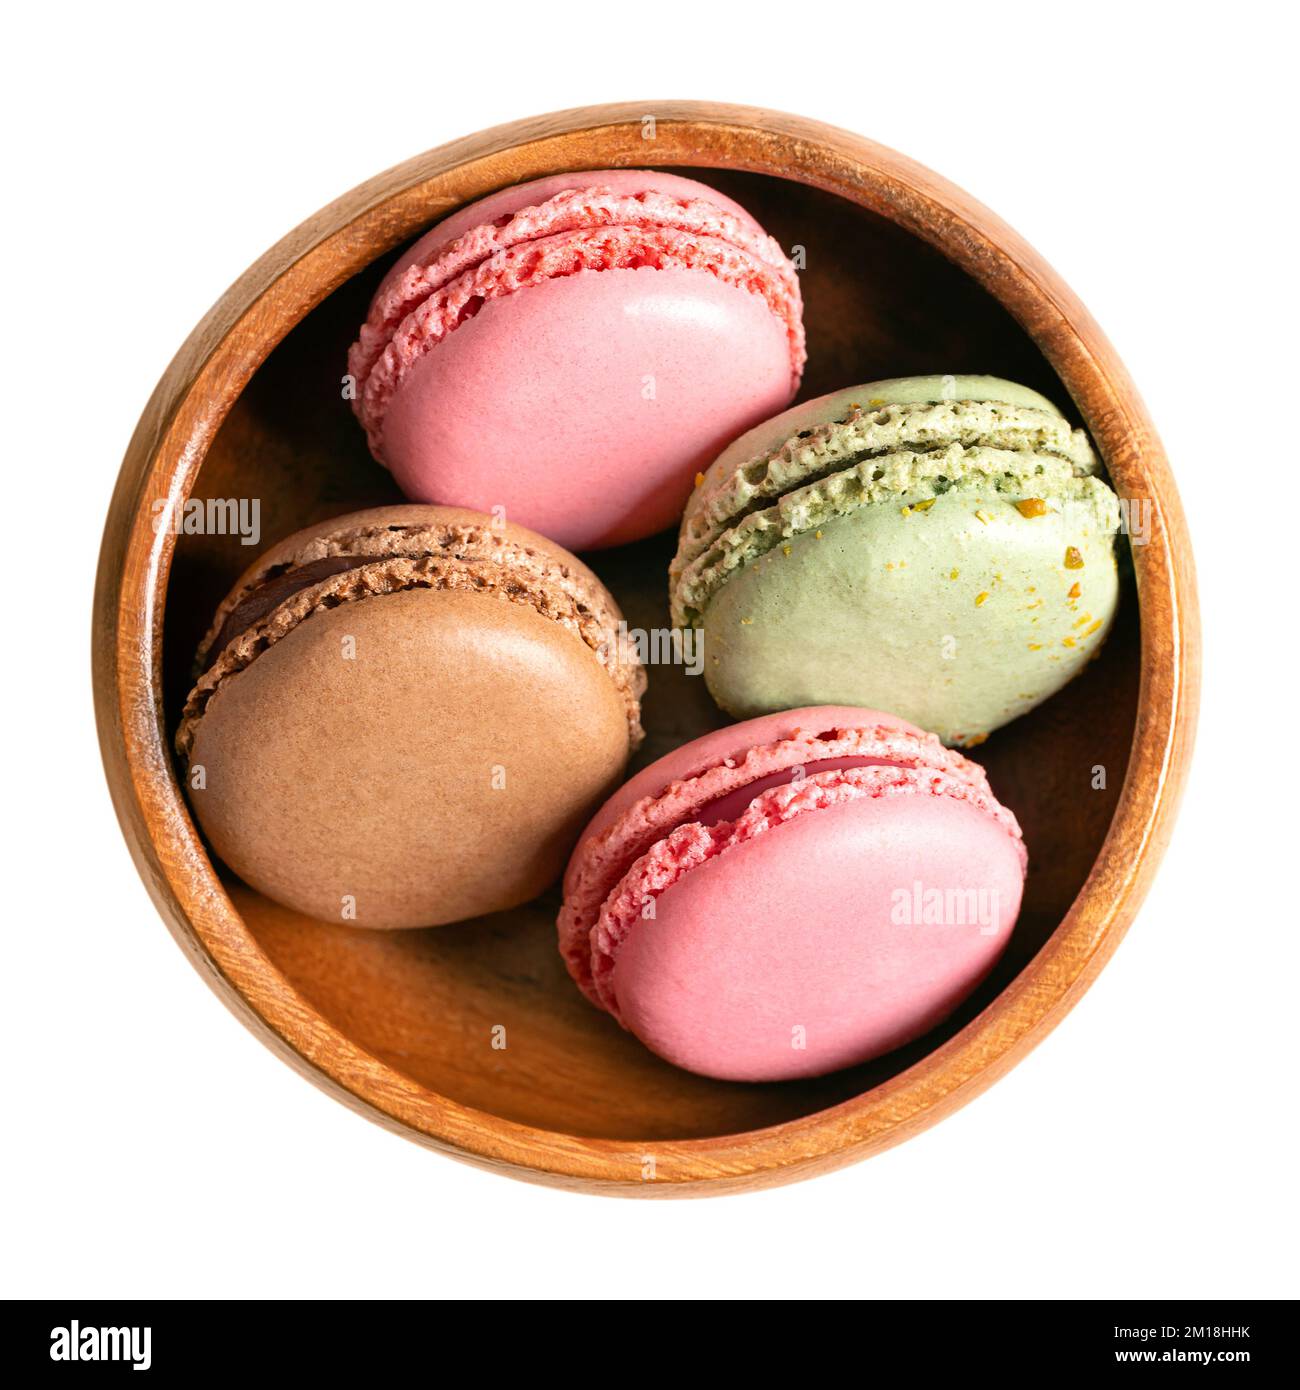 Macarons, French macaroons in a wooden bowl. Sweet meringue-based confection, Parisian-style, made with egg white, sugar, almonds and food coloring. Stock Photo